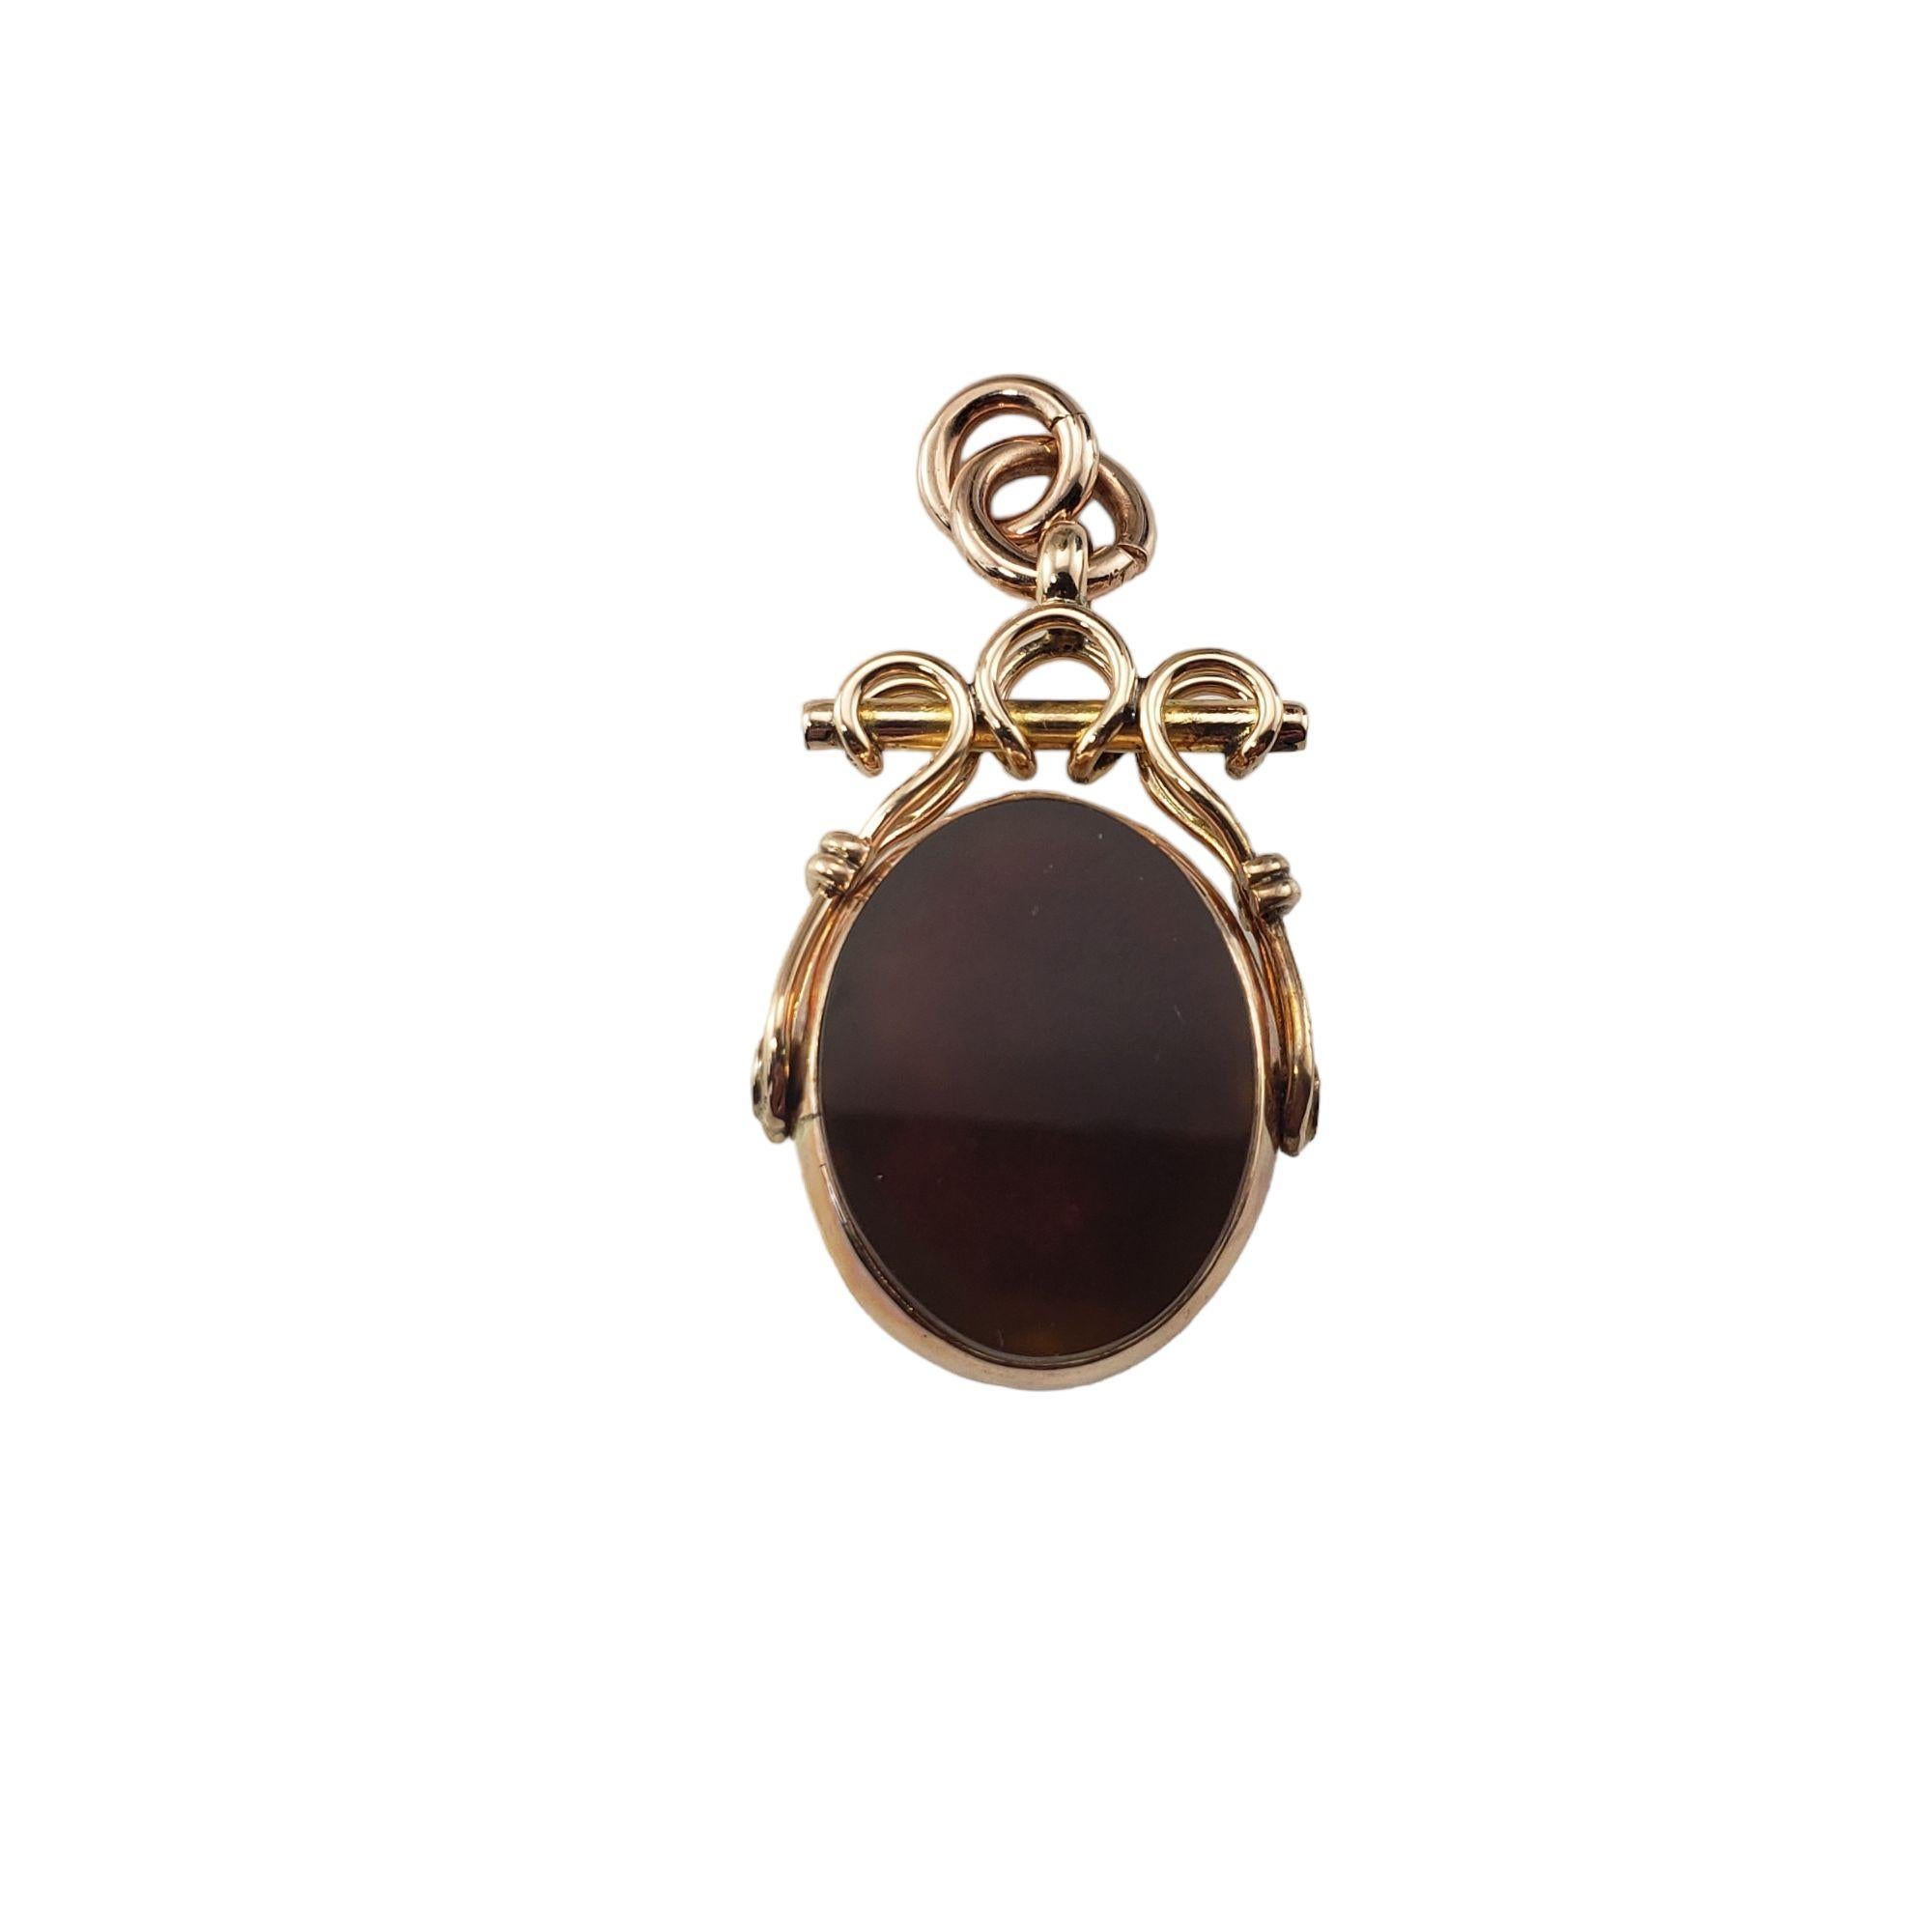 Antique 9 Karat Yellow Gold Carnelian and Bloodstone Spinner Fob-

This elegant spinner fob features bloodstone and carnelian 
(20 mm x 15 mm) set in beautifully detailed 9K yellow gold. 

Size: 40 mm x 19 mm

Weight: 4.2 dwt. / 6.6